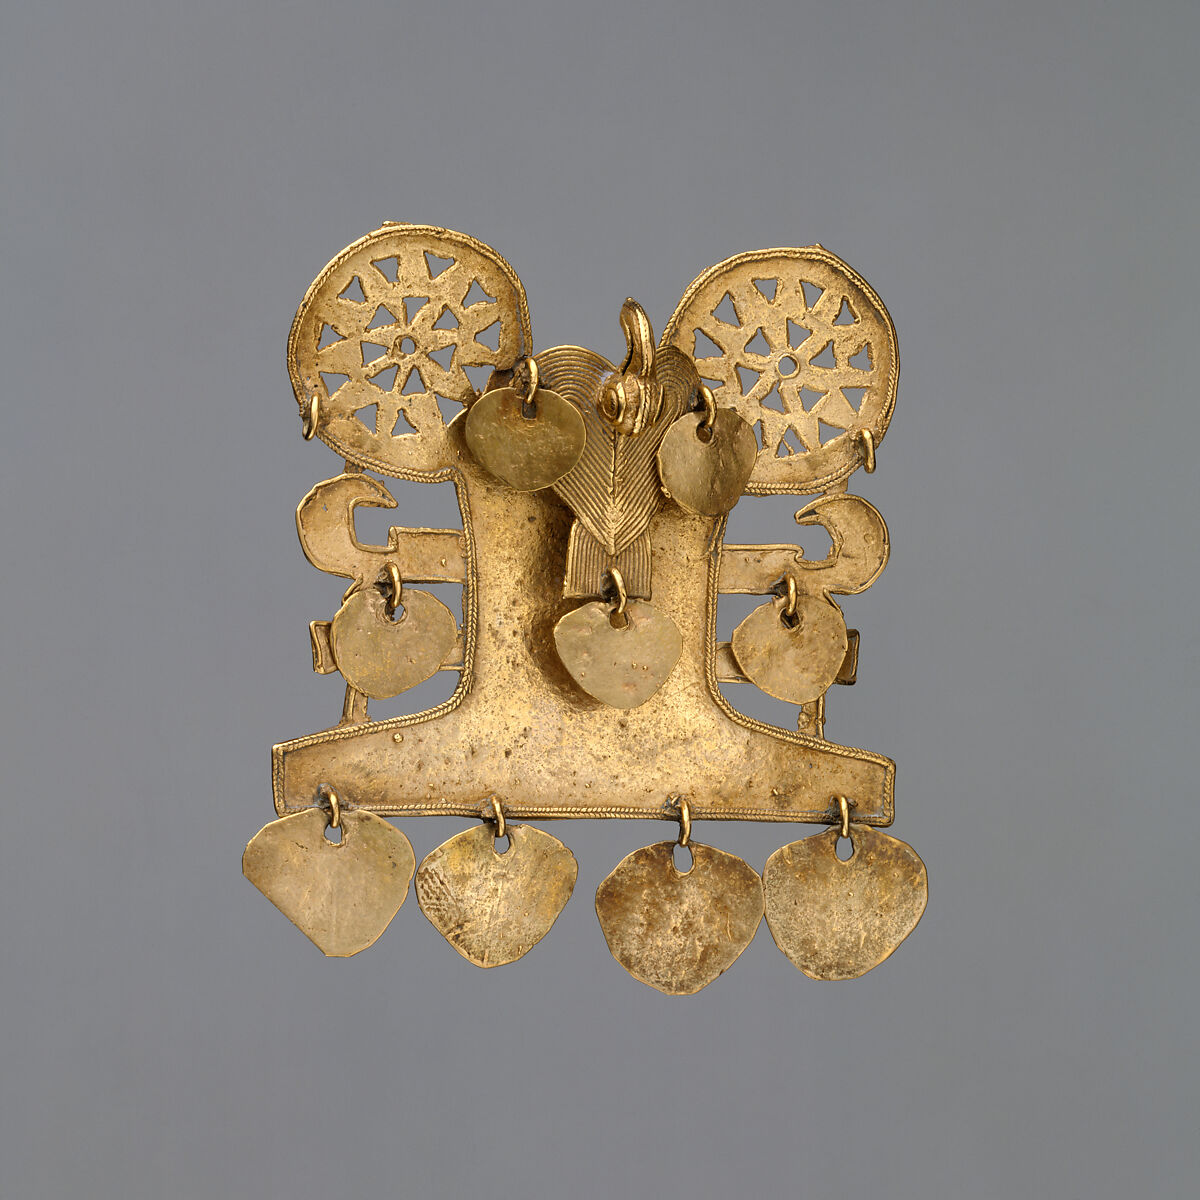 Pendant with Bird, Gold (cast alloy), Muisca 